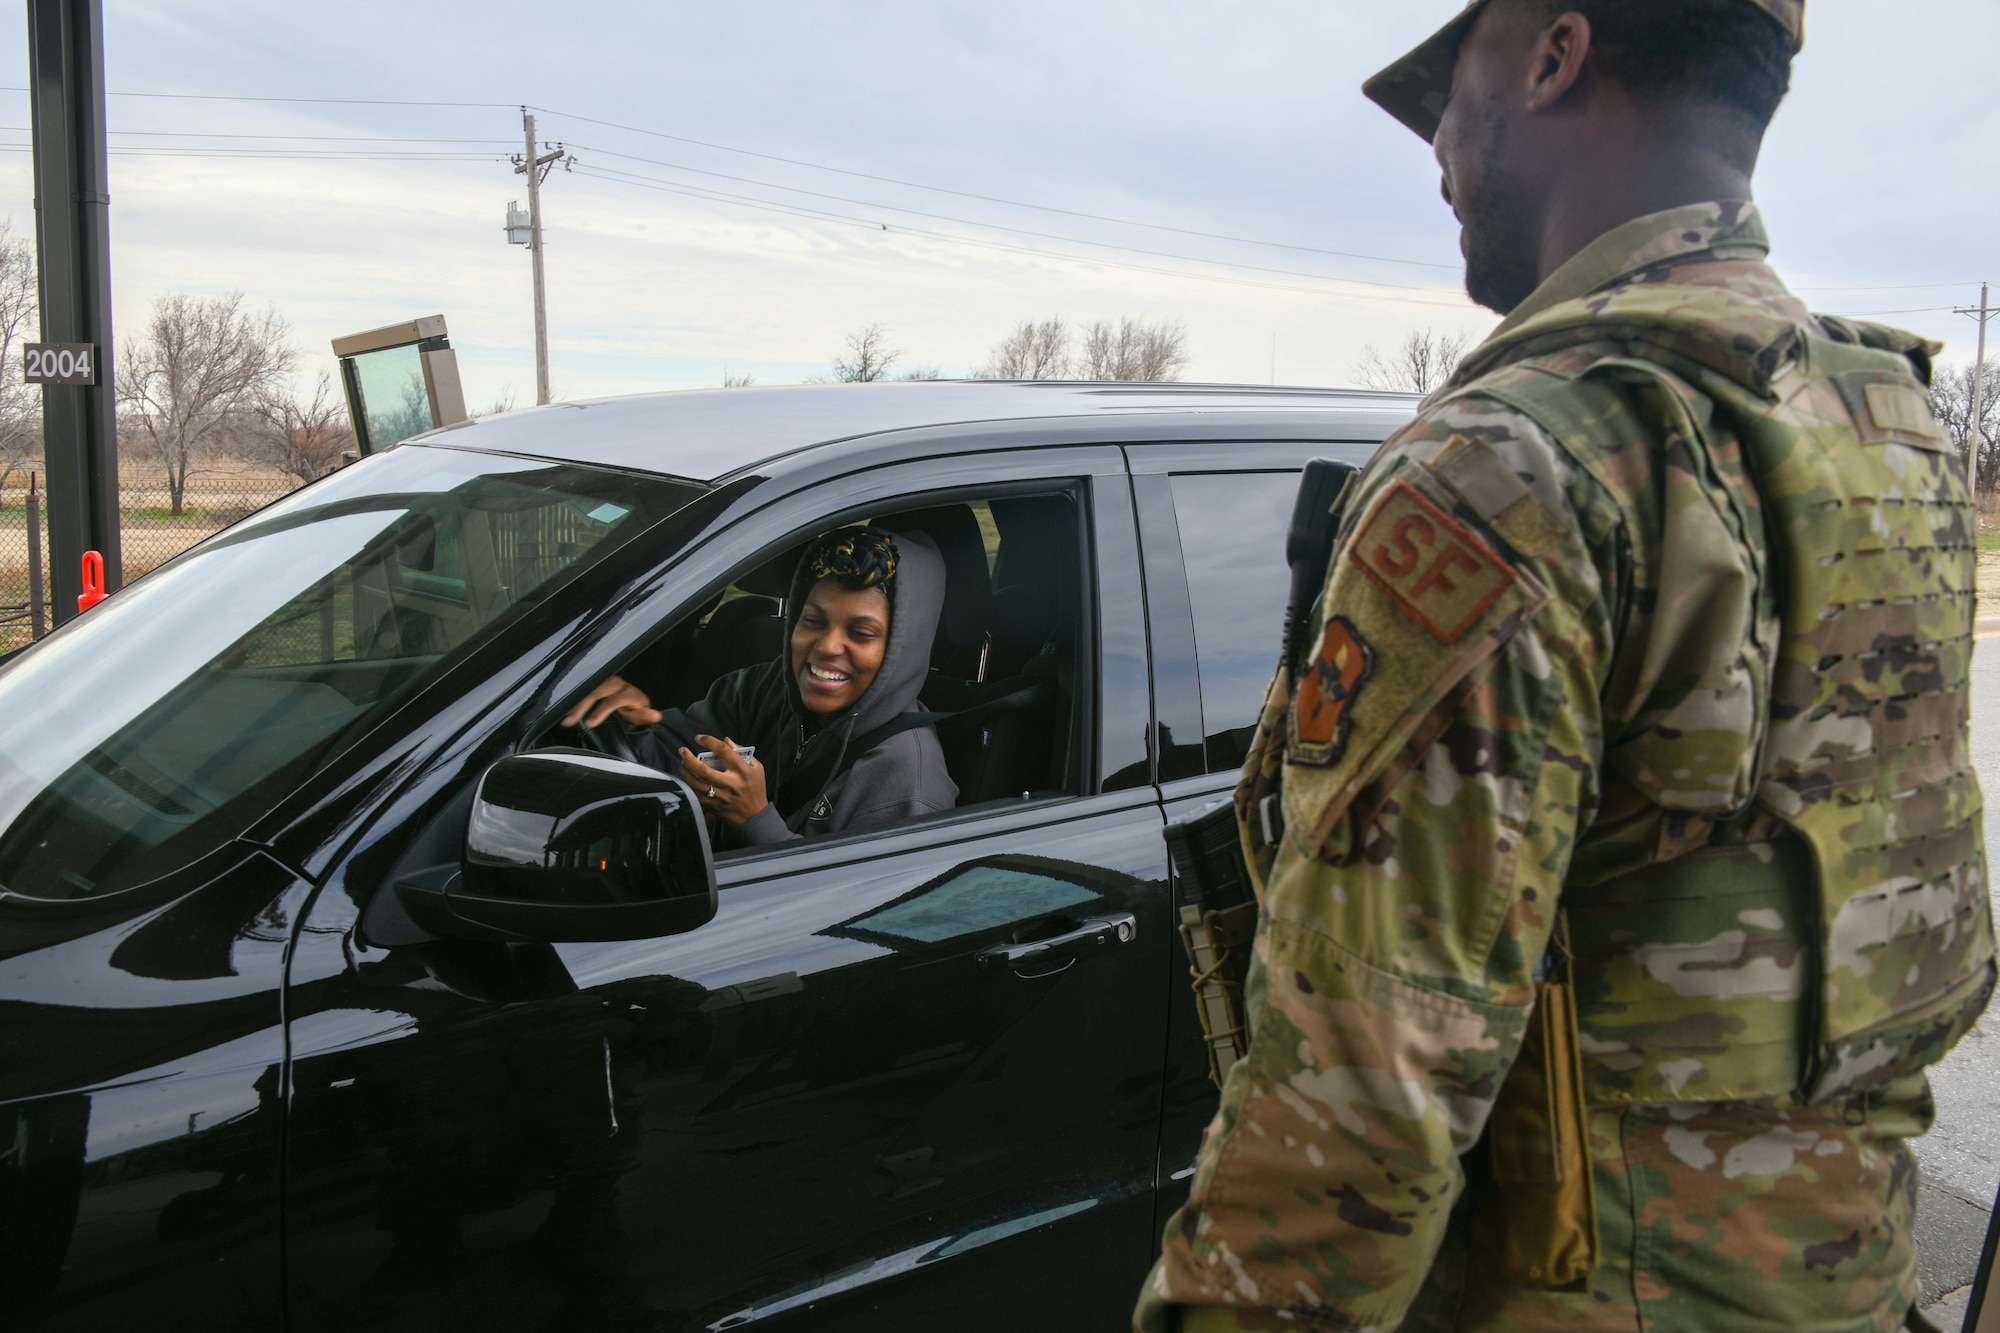 U.S. Air Force Airman 1st Class Michael Mason, 97th Security Forces Squadron patrolman, greets Savon Booker-Hunt at Altus Air Force Base, Oklahoma, Feb. 21, 2023. A patrolman’s many duties include checking identification and vehicle tags for gate entry. (U.S. Air Force photo by Airman 1st Class Miyah Gray)